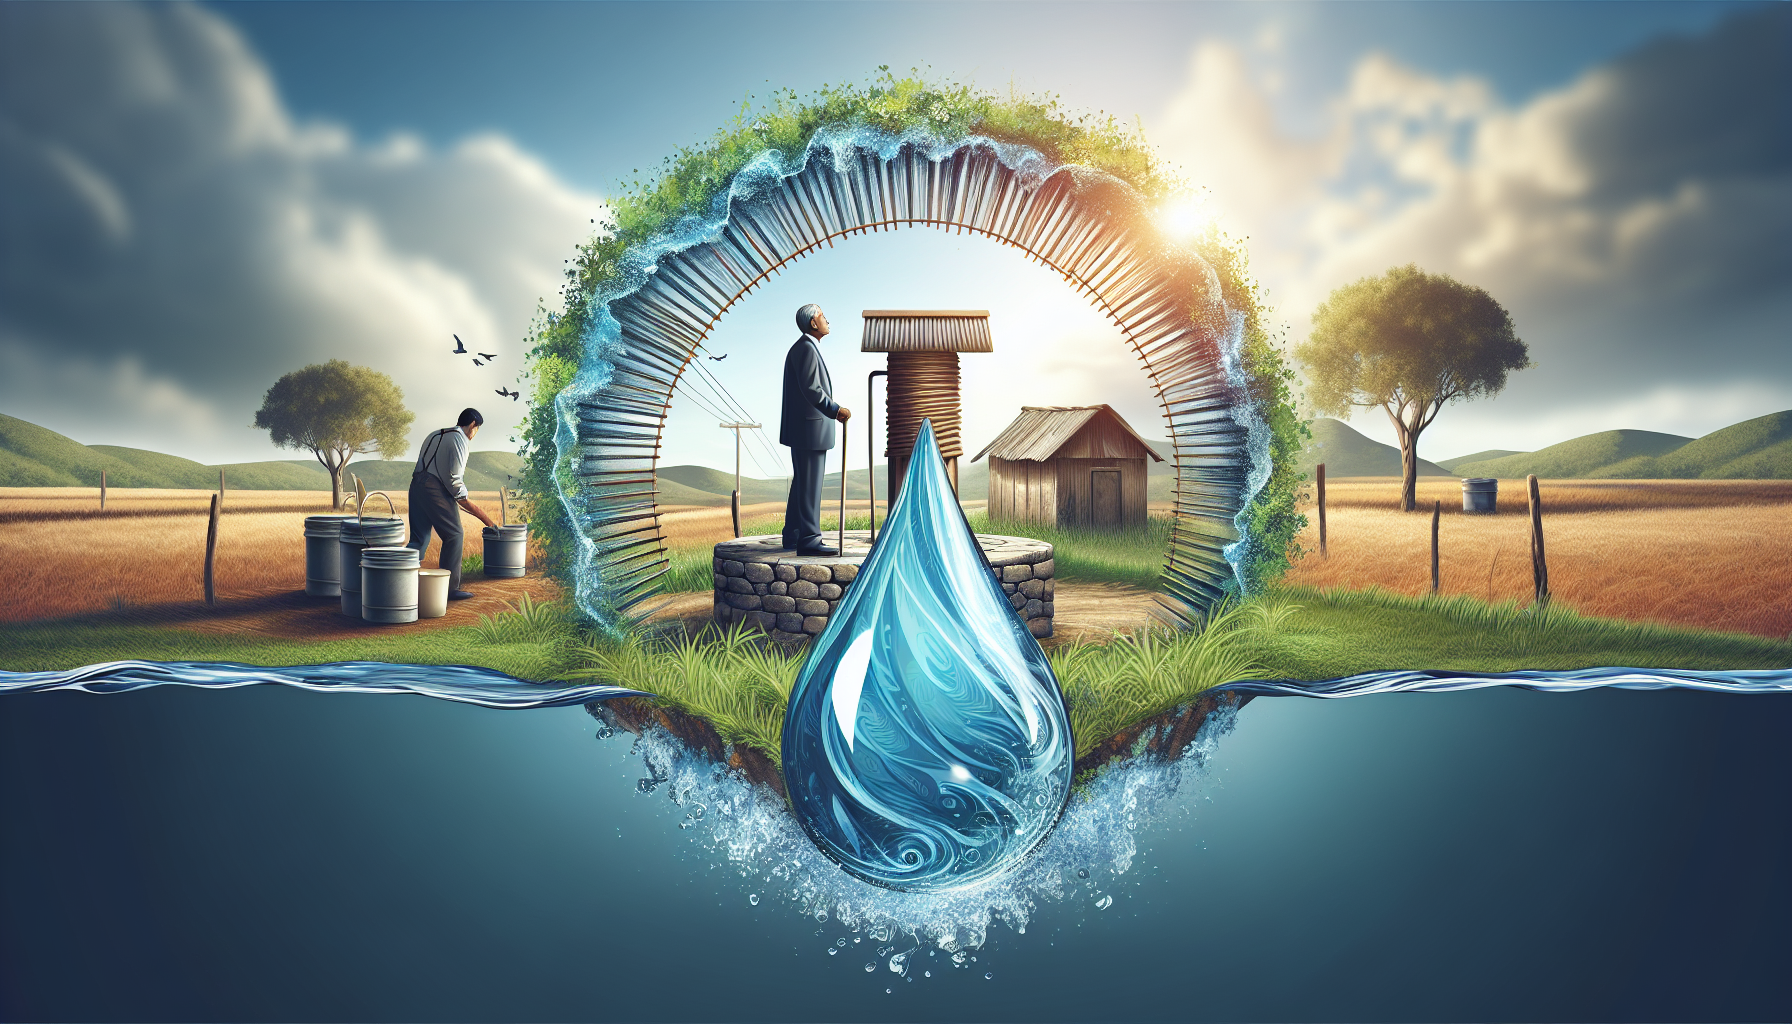 How Can I Protect My Well From Safety Issues Associated With Well Water System Vulnerability?